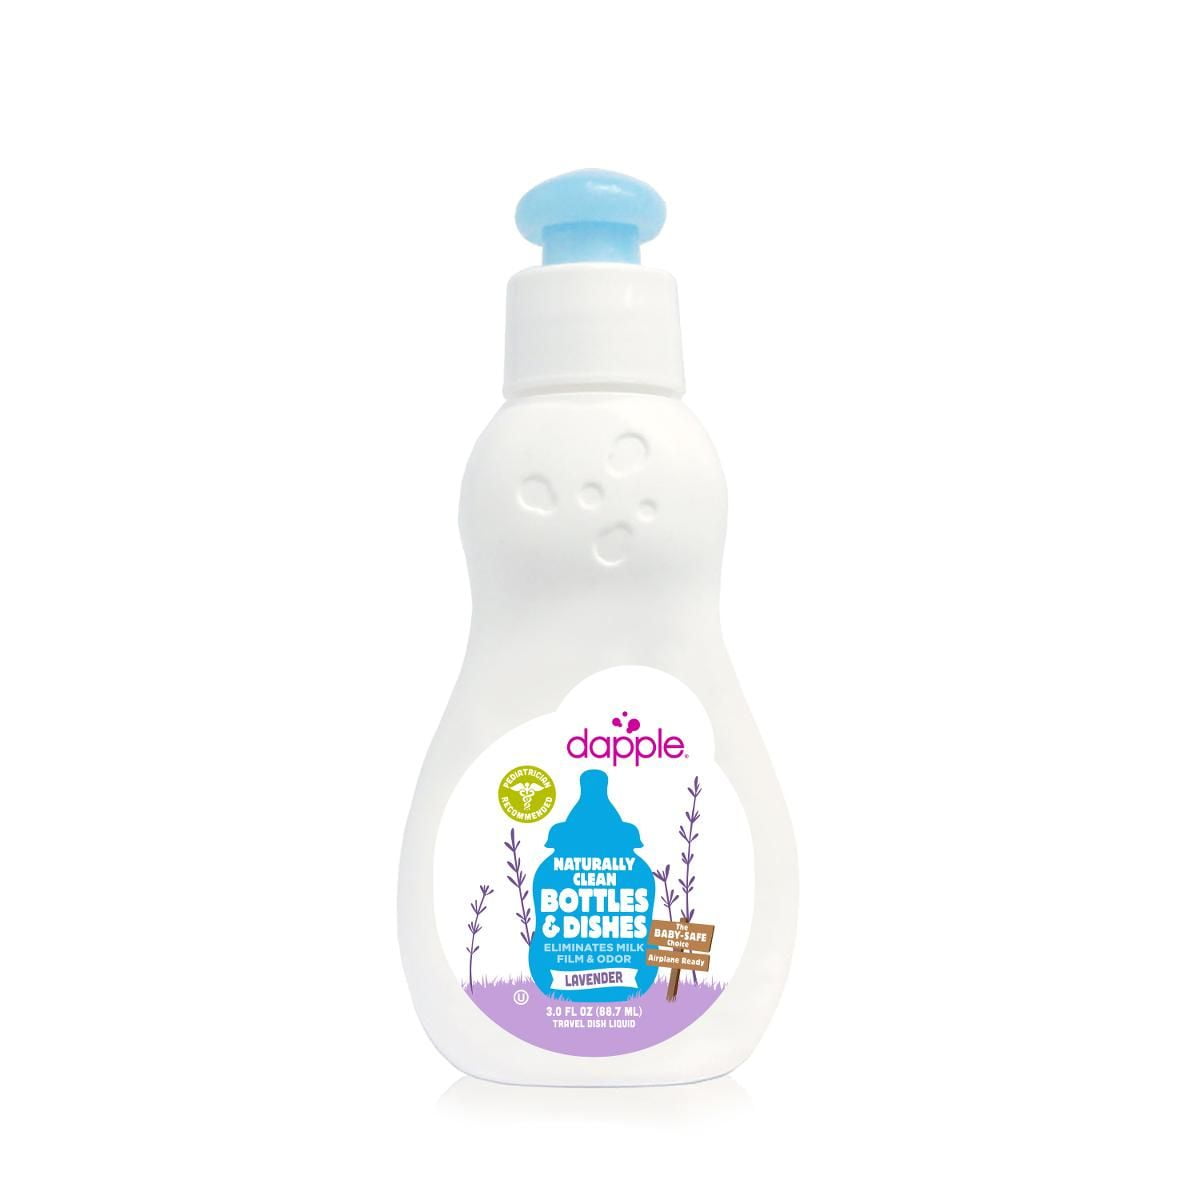 ✓ Dapple Baby Bottle and Dish Soap Review 🔴 